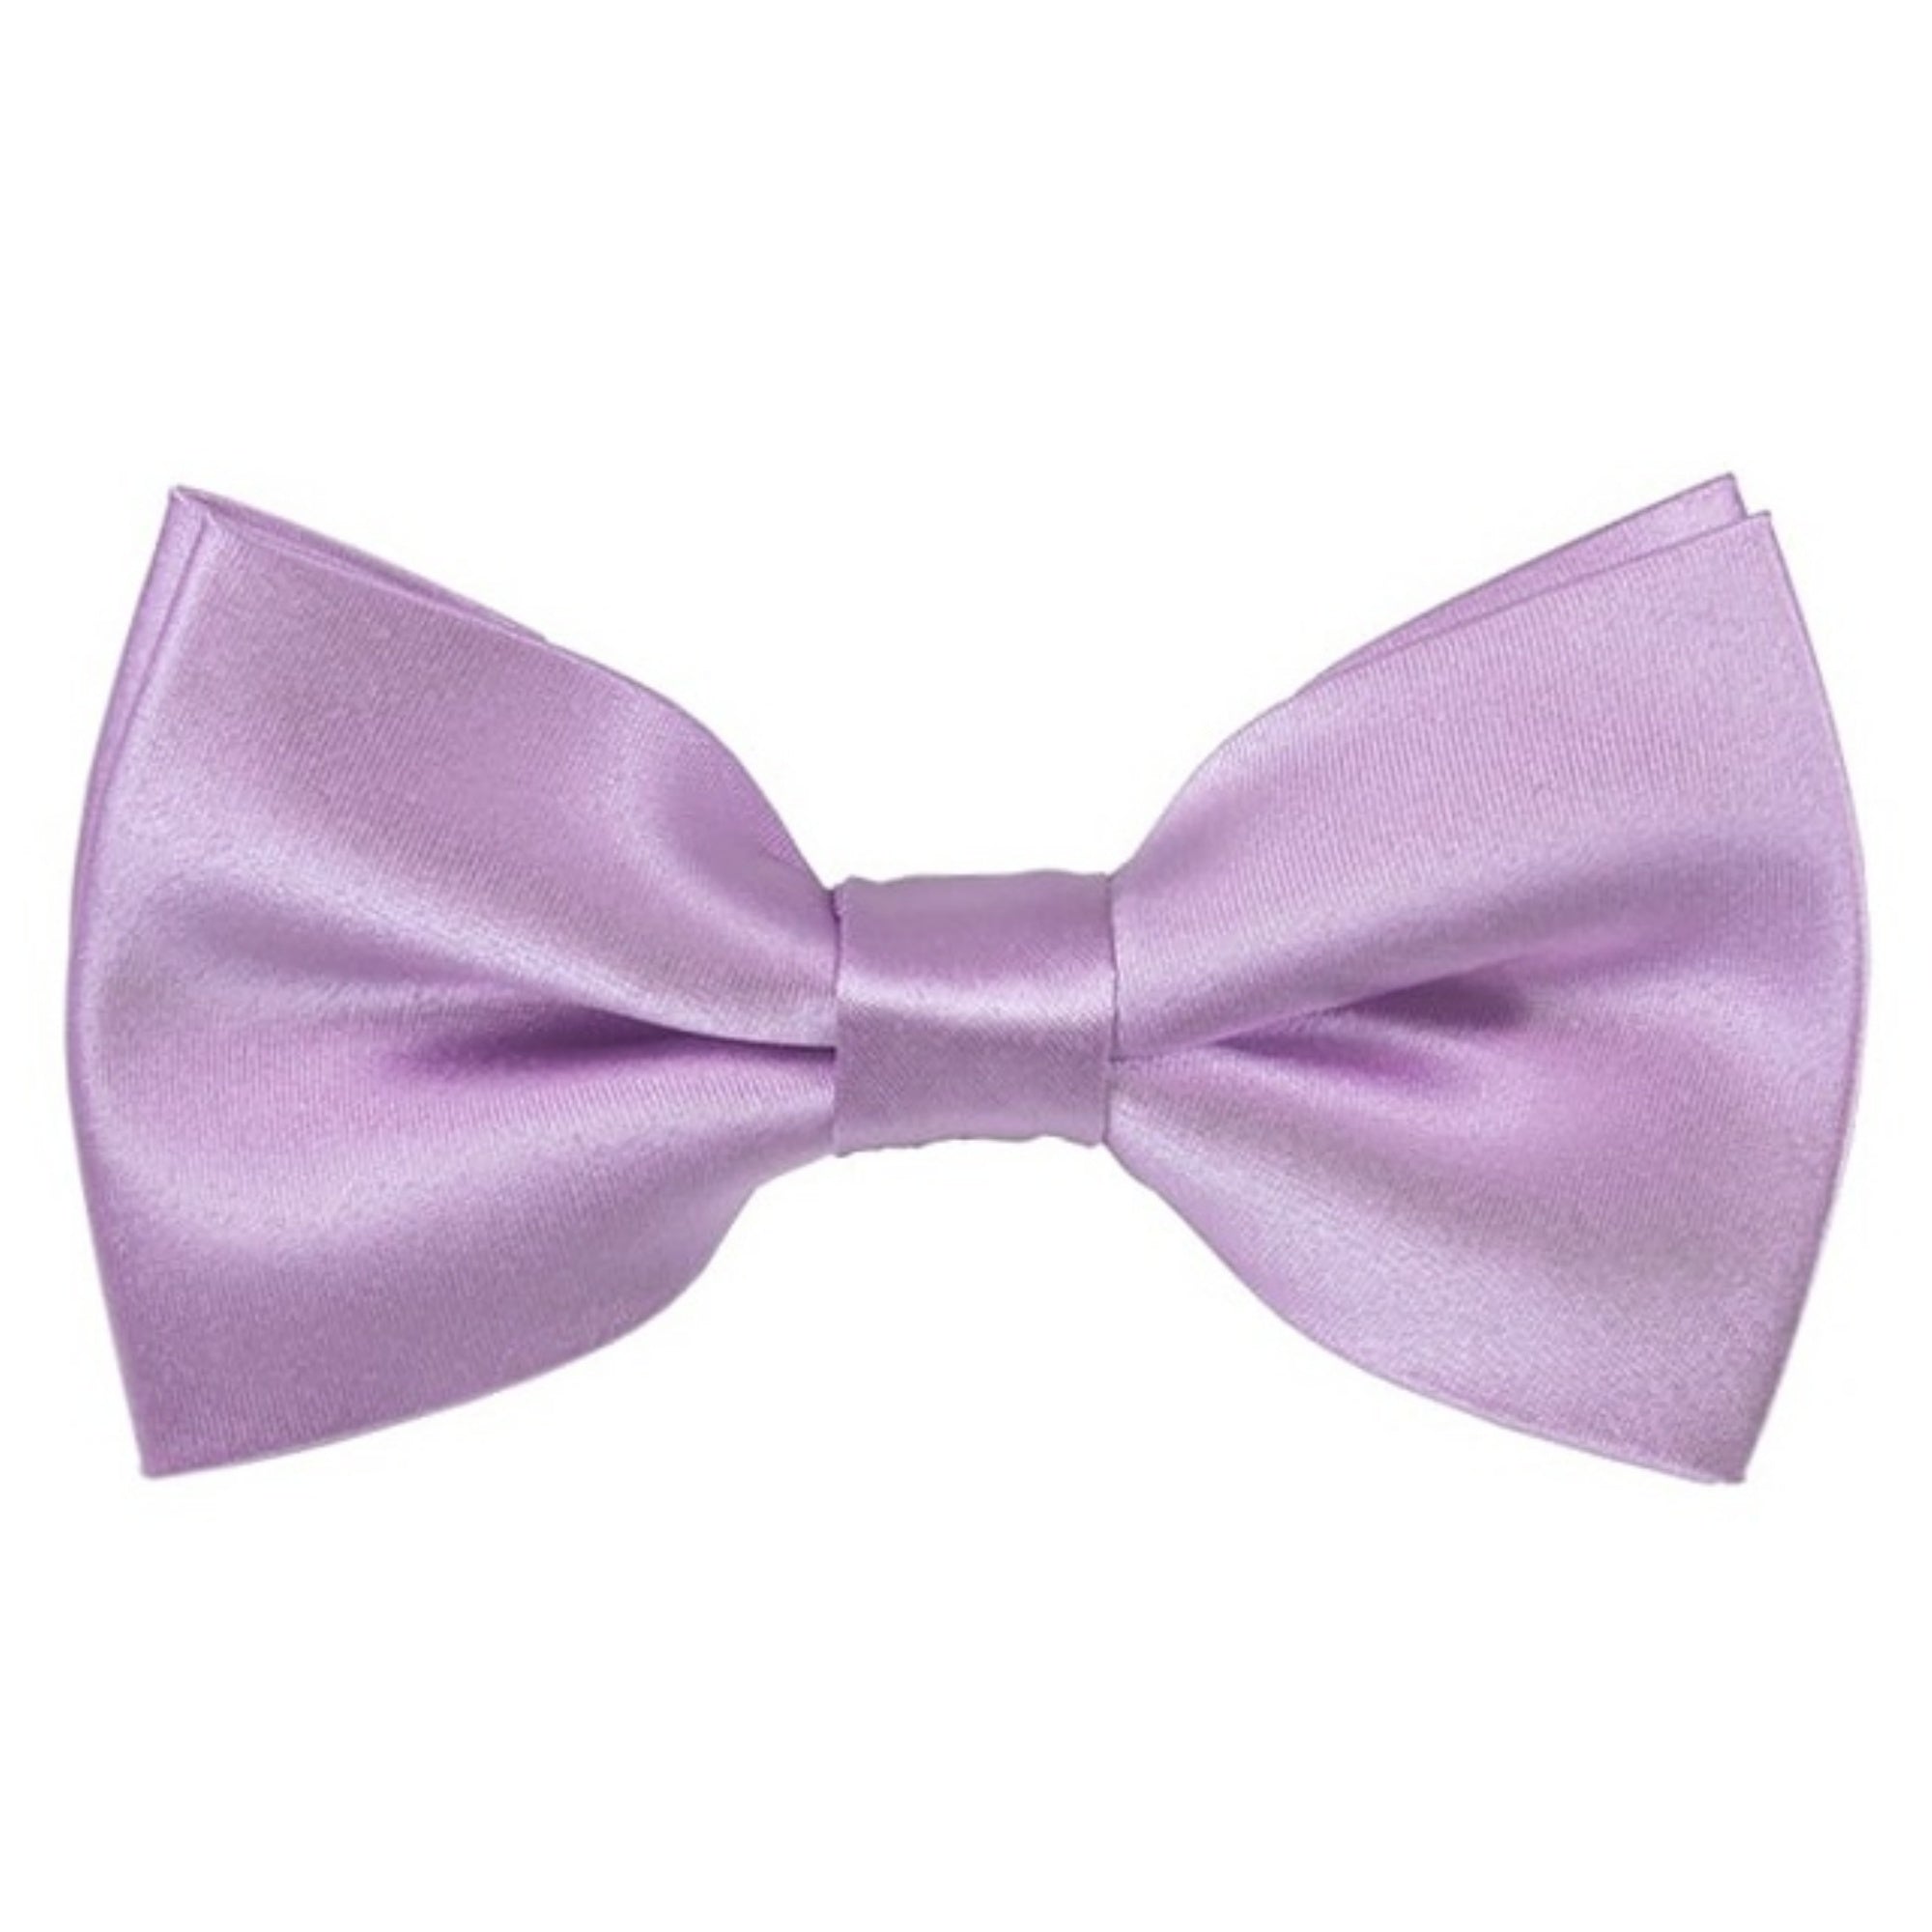 TheDapperTie Men's Solid Color 2.5 W And 4.5 L Inch Pre-Tied adjustable Bow Ties Men's Solid Color Bow Tie TheDapperTie Lavender  